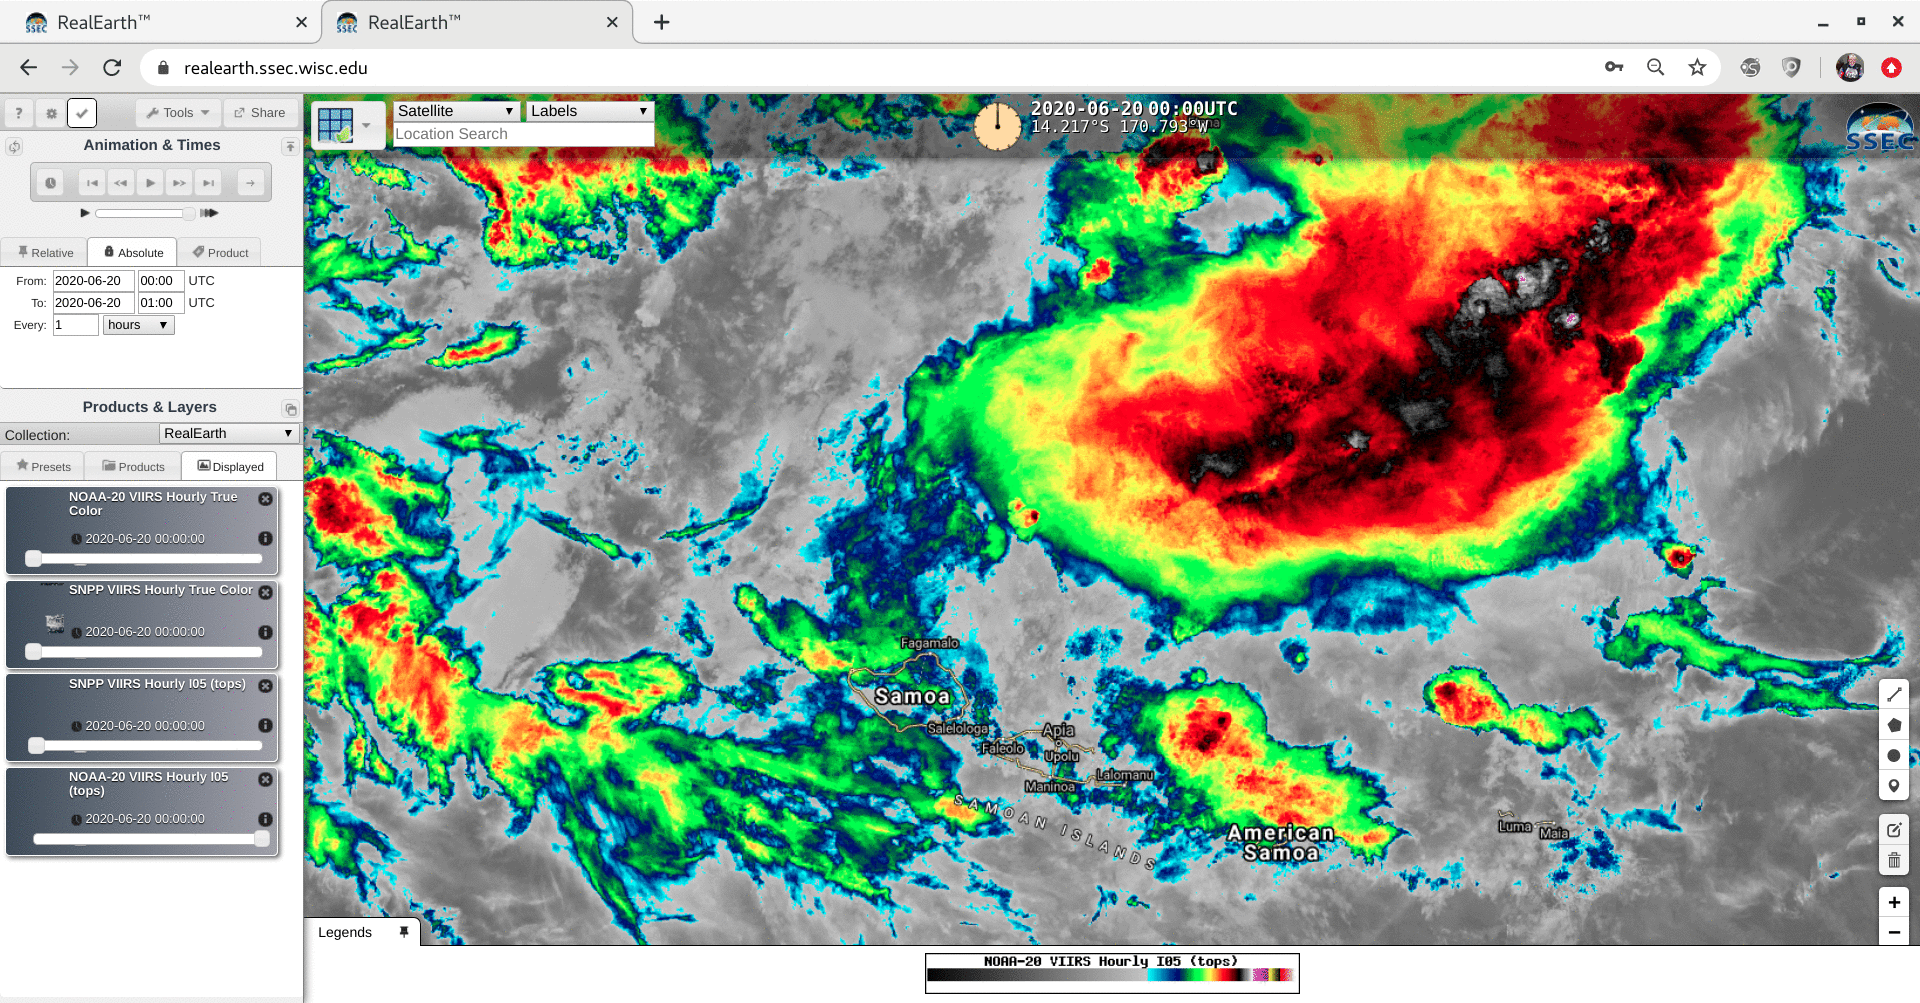 A GIF shows infrared images of thunderstorms over American Samoa, as they developed over the course of an hour. Red portions of the image, indicating the colder and more intense areas of the storms, drift closer to American Samoa over the course of the hour.